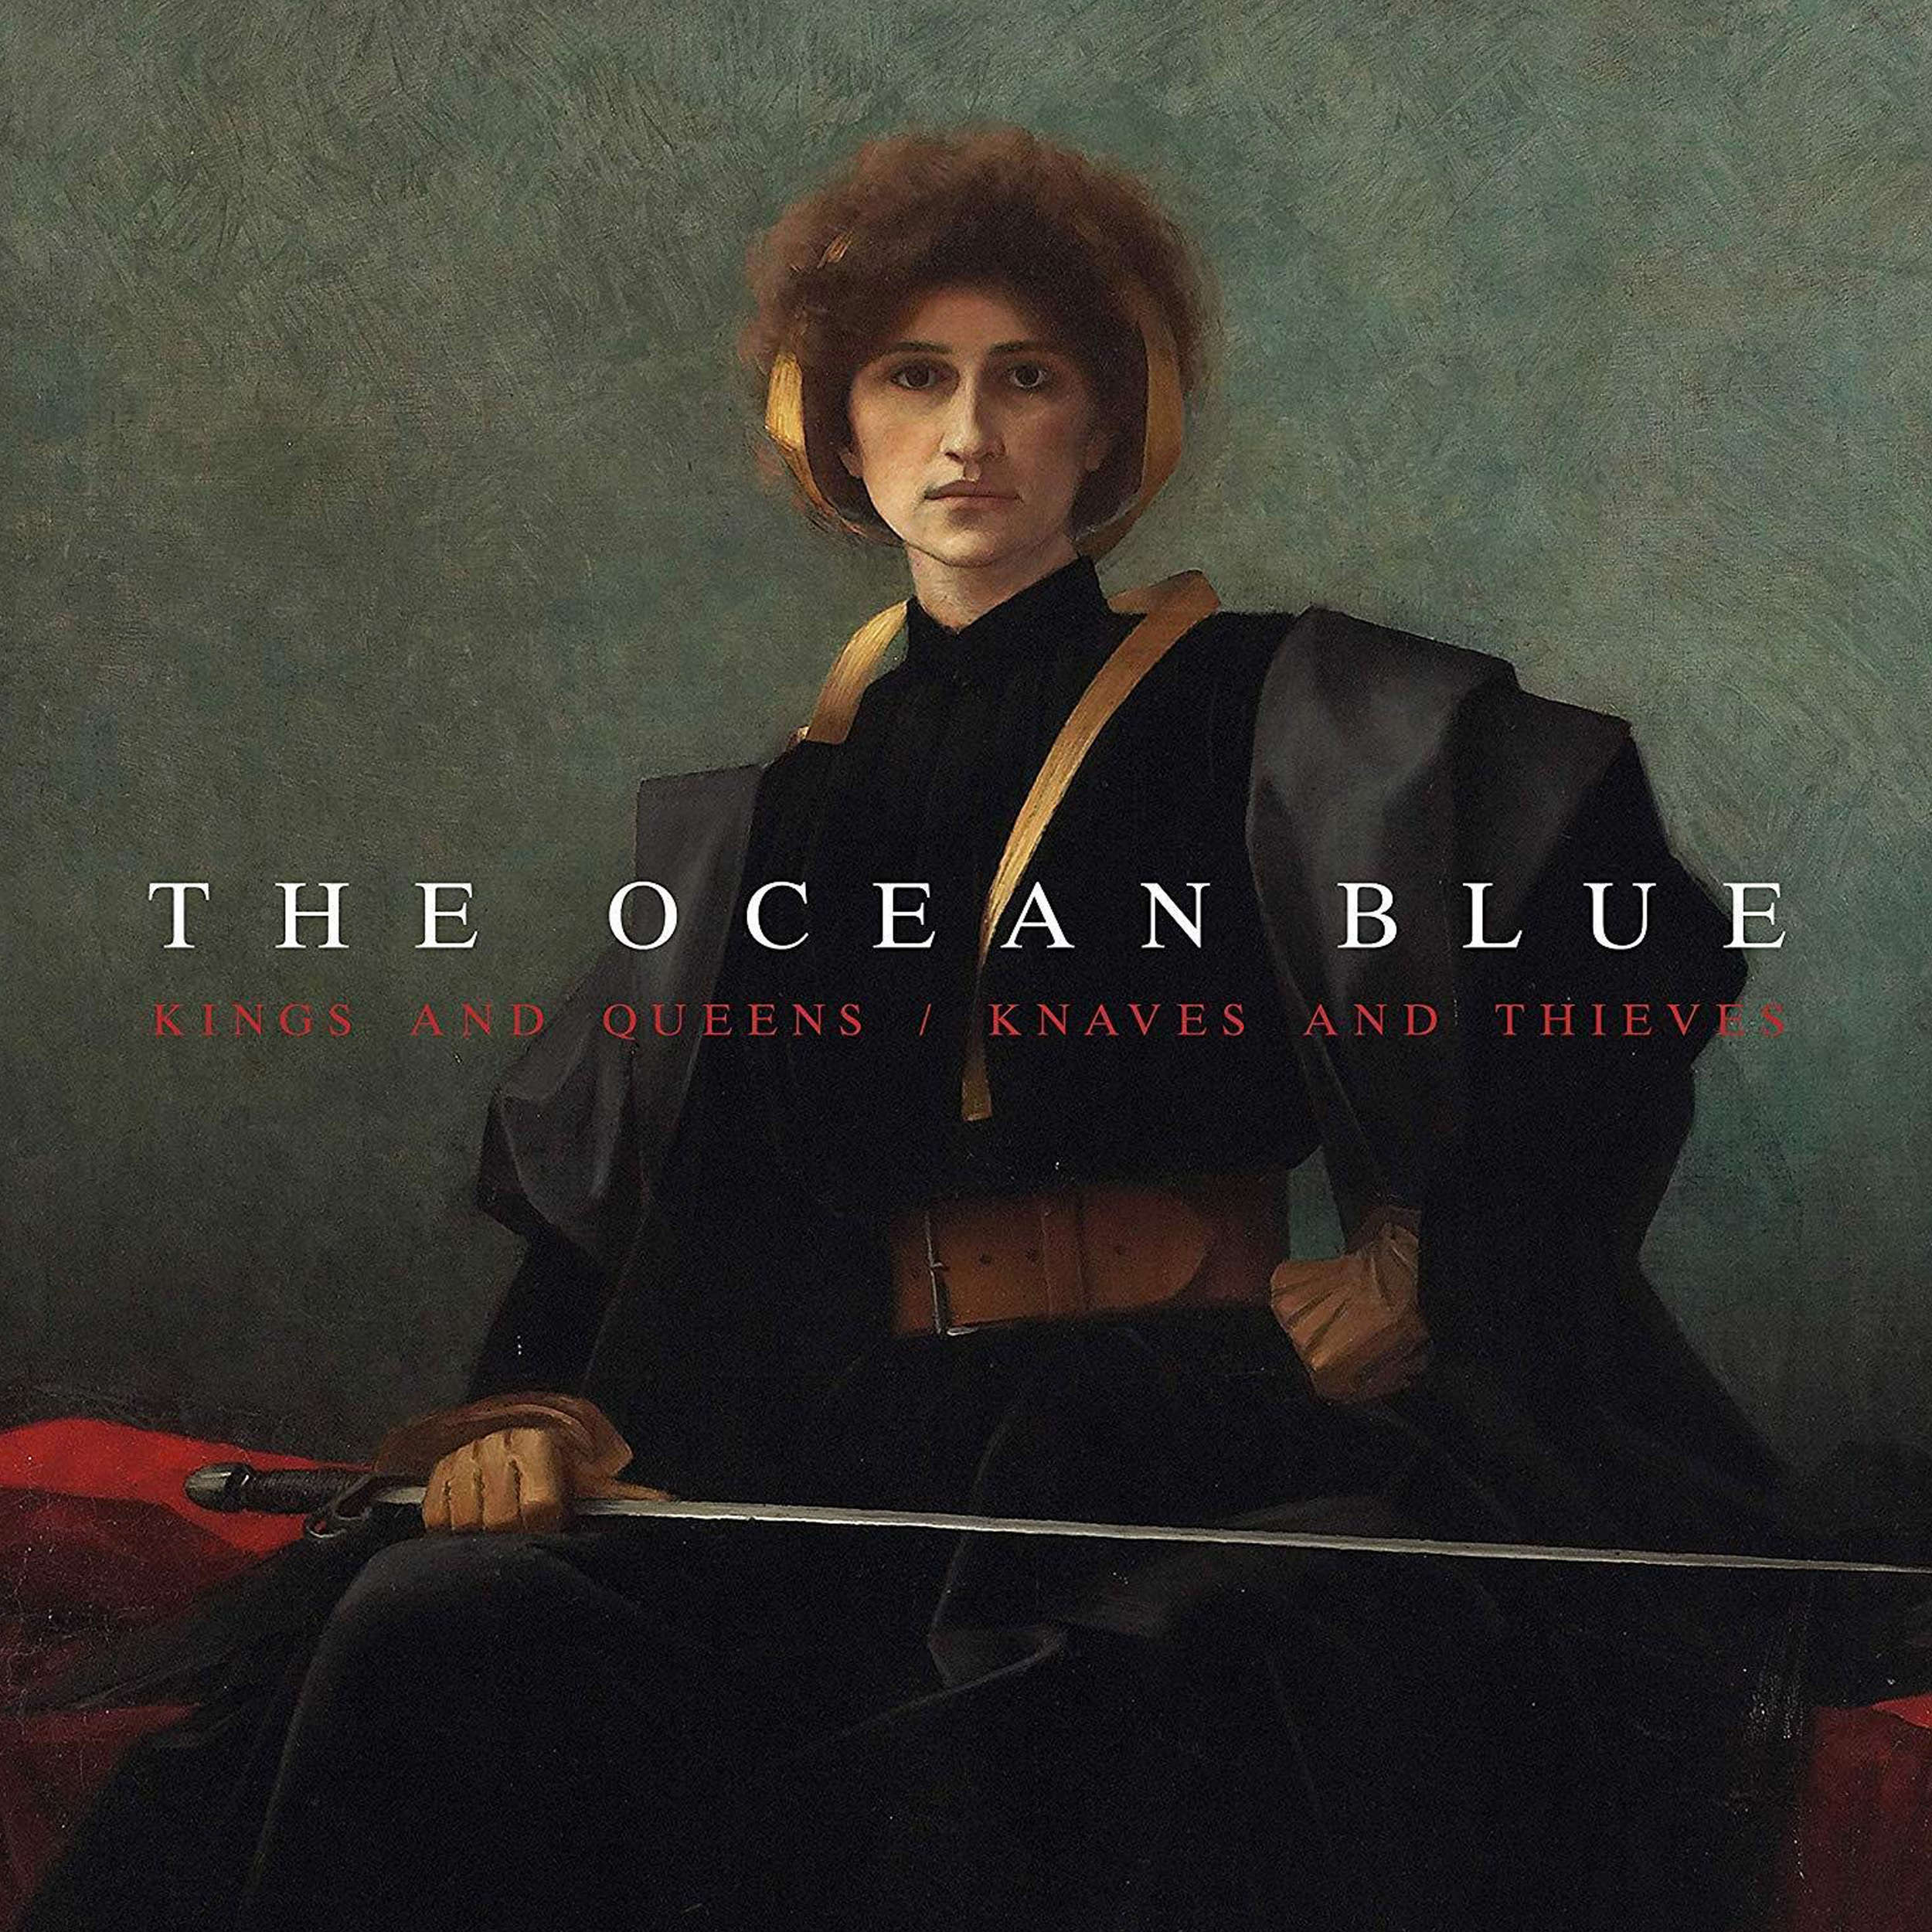 The Ocean Blue - Kings and Queens / Knaves and Thieves